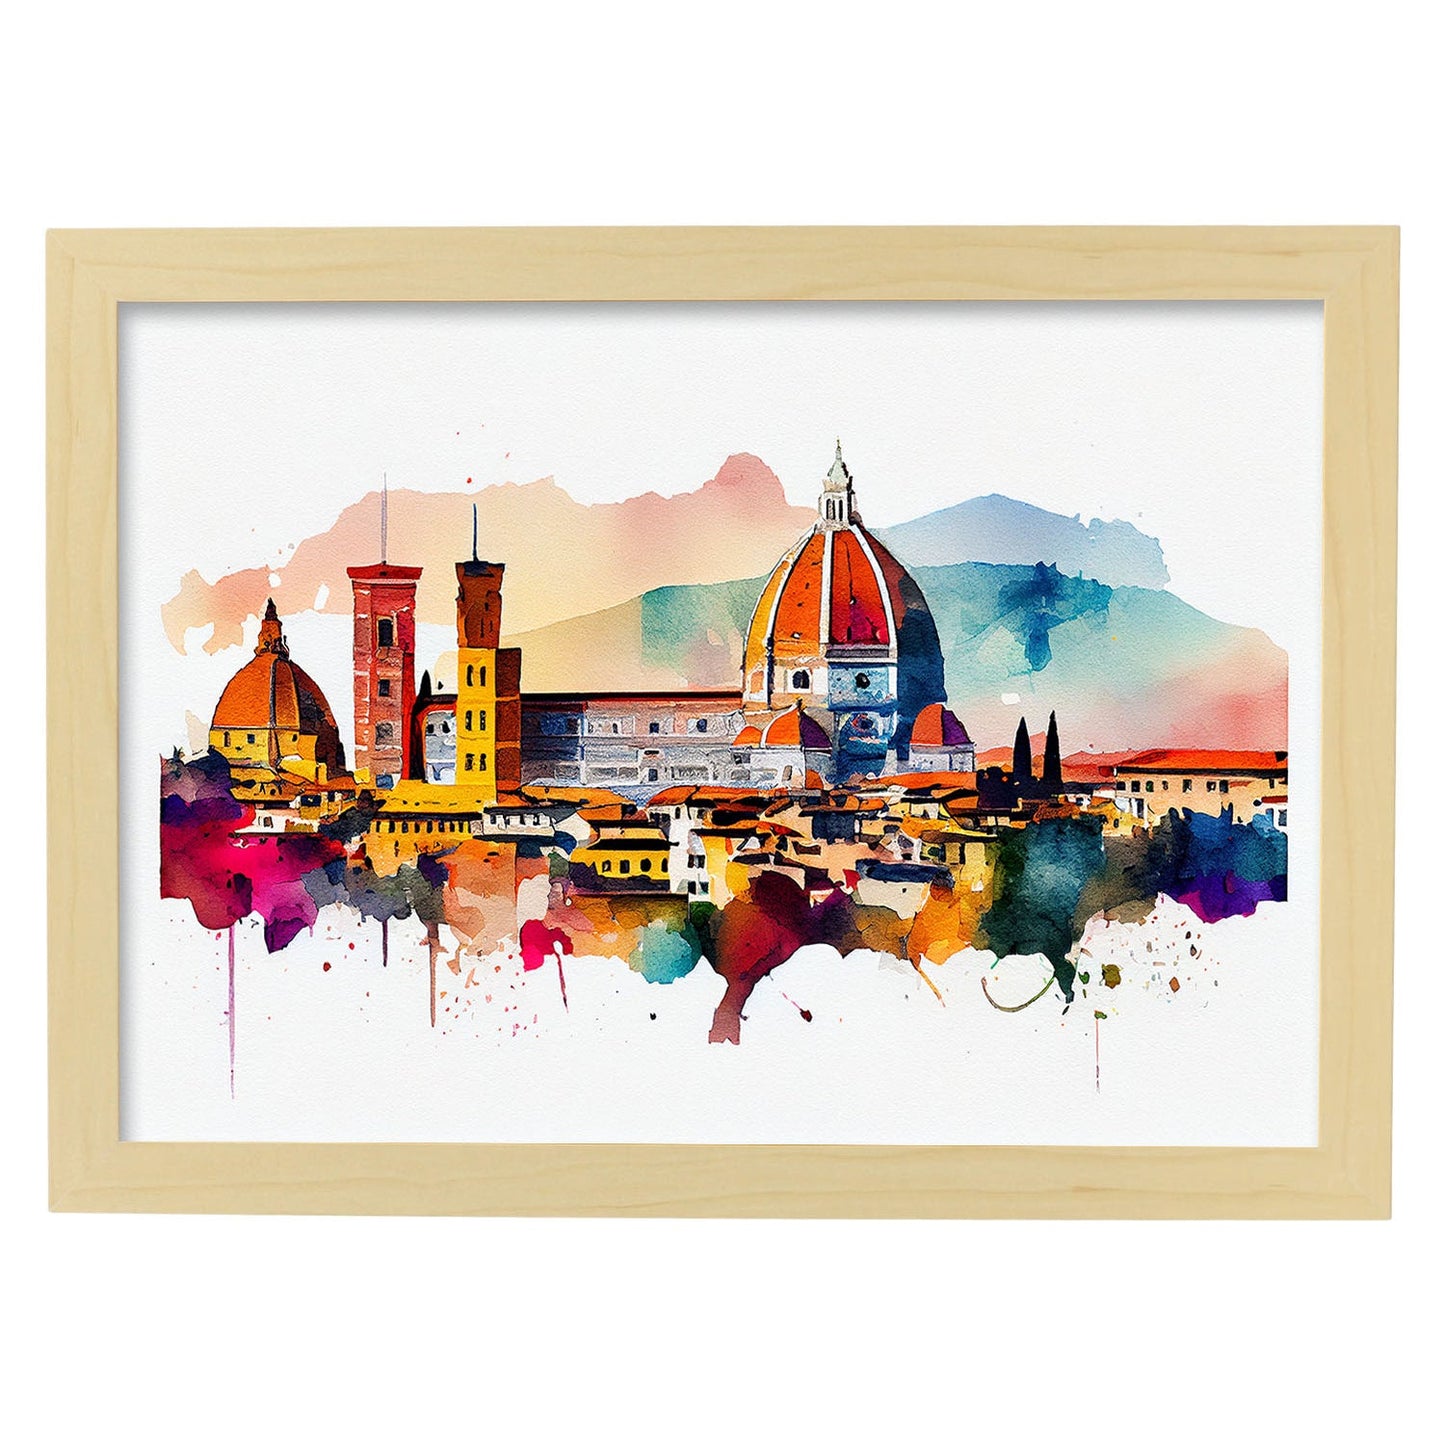 Nacnic watercolor of a skyline of the city of Florence_4. Aesthetic Wall Art Prints for Bedroom or Living Room Design.-Artwork-Nacnic-A4-Marco Madera Clara-Nacnic Estudio SL